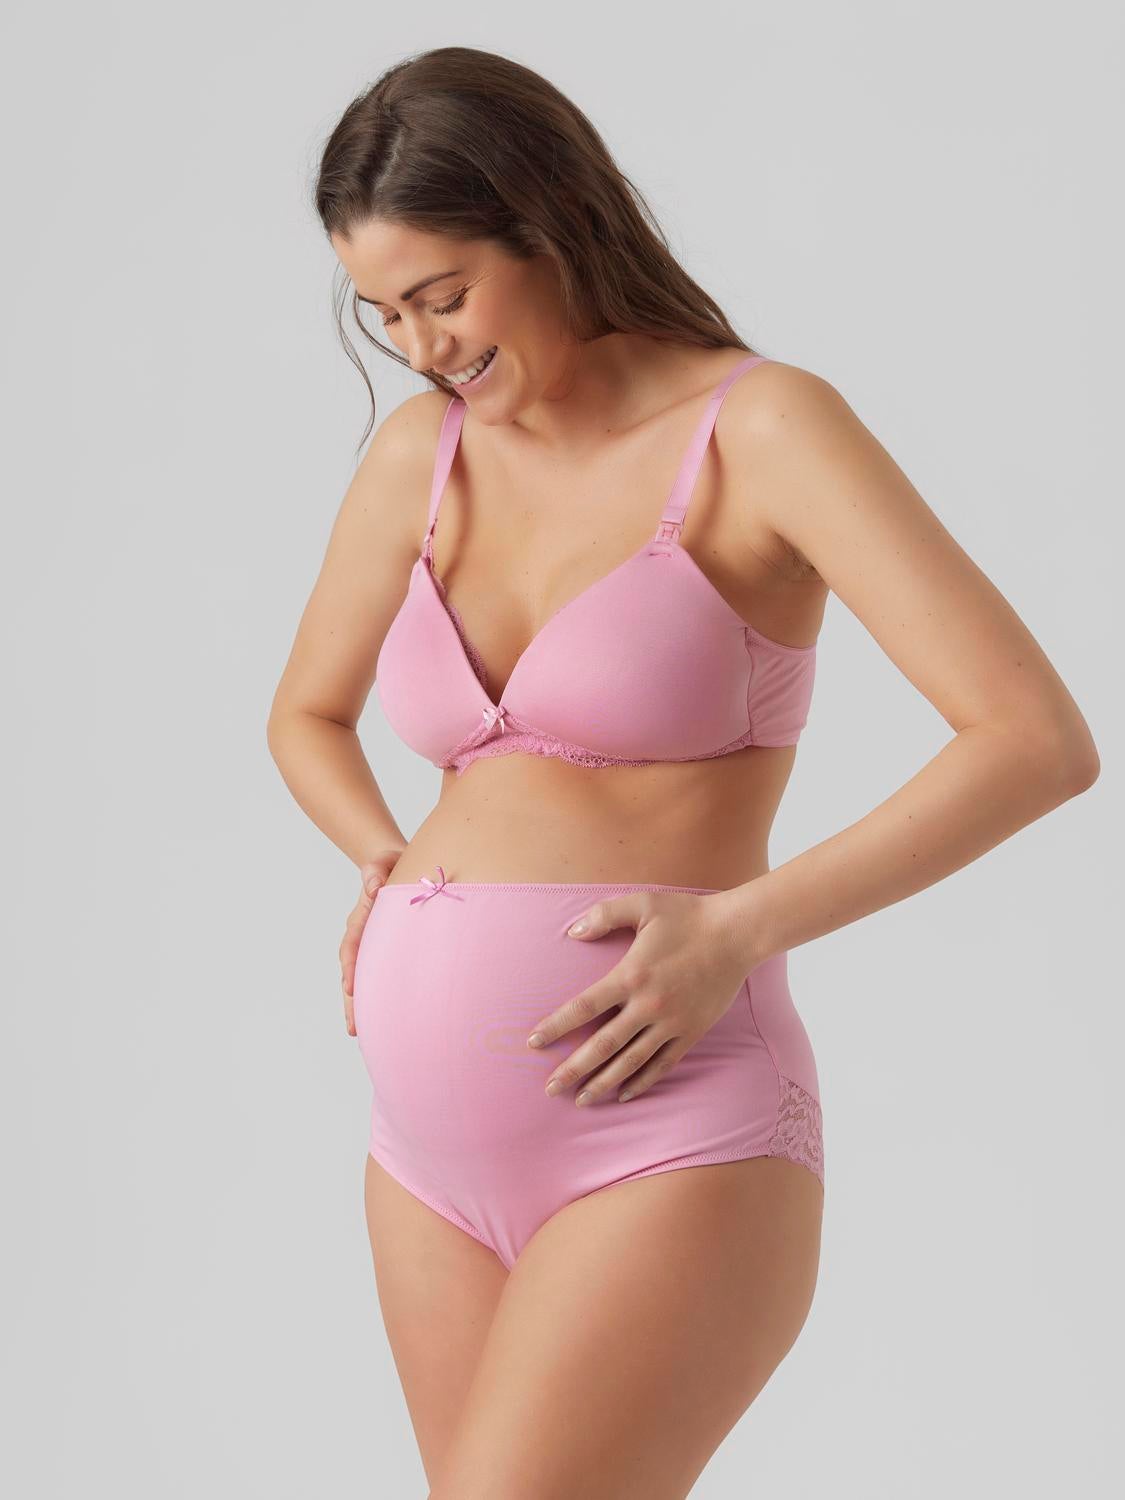 The Benefits Of Wearing A Maternity/Nursing Bra – Moms and Mamas